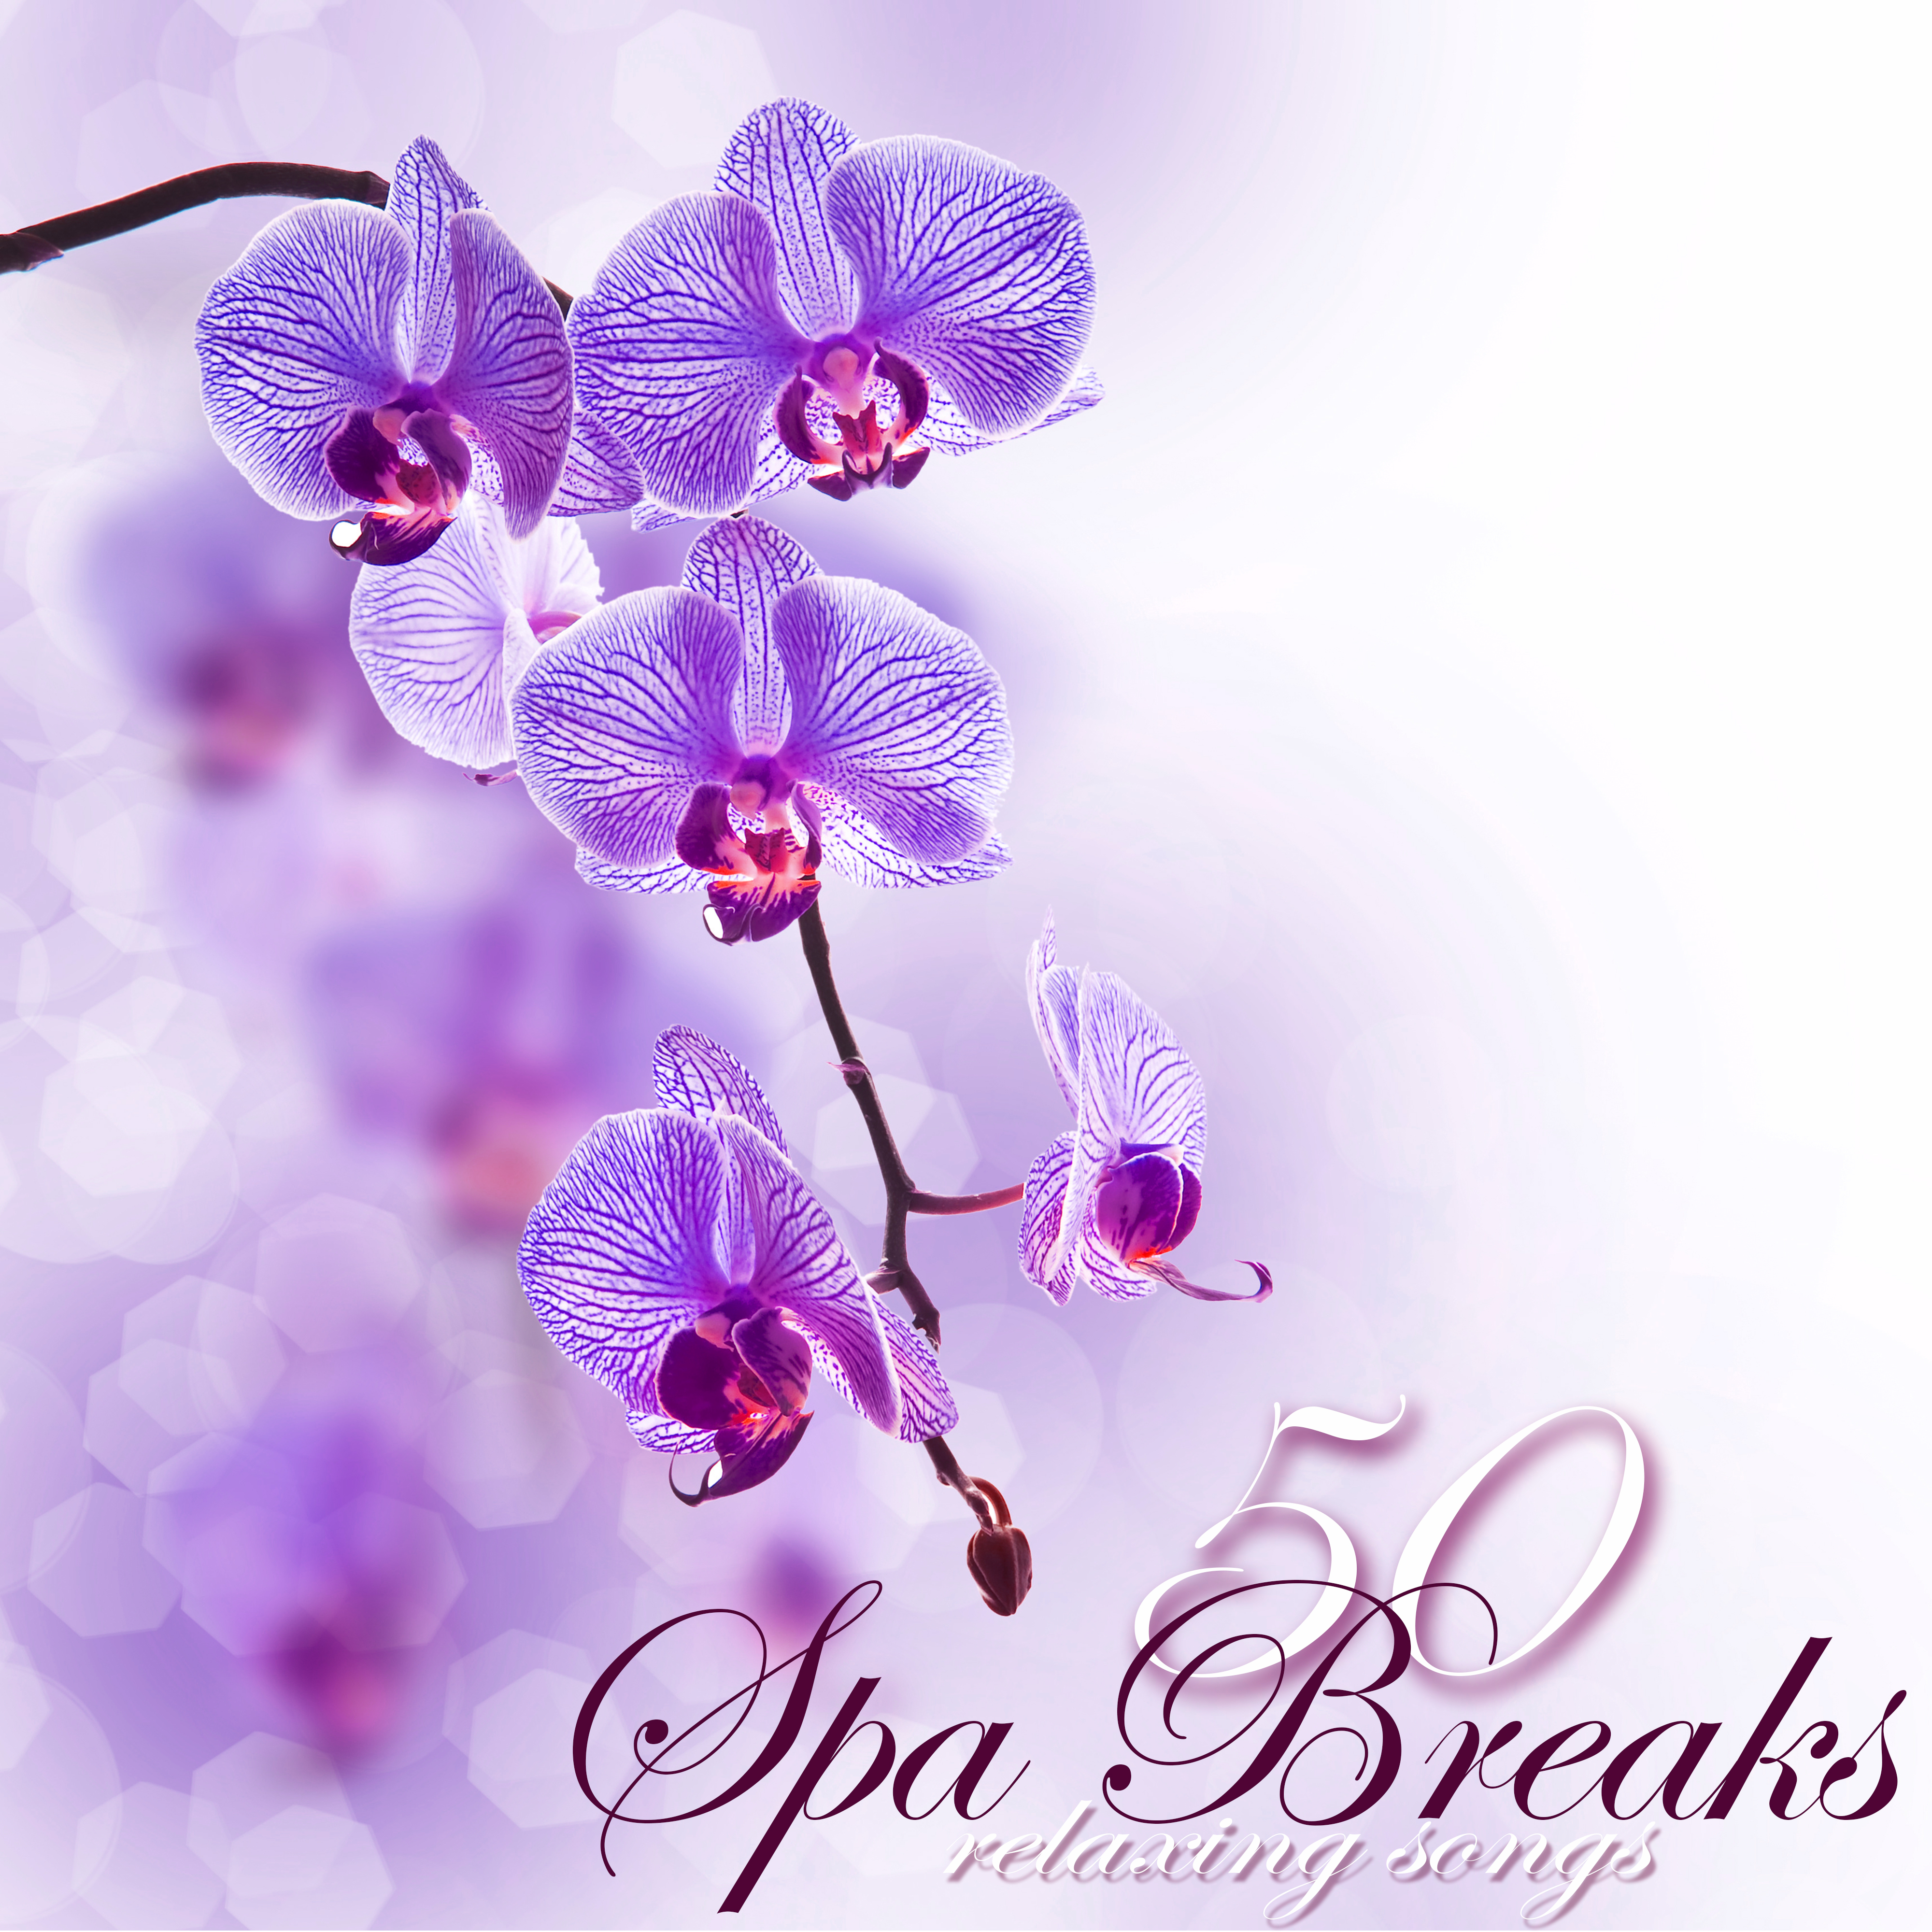 Spa Breaks 50 Relaxing Songs – Fifty Quiet Moments of Relaxation under Bamboo Shades in Your Zen Room, Emotional Peaceful Songs for Spa Day